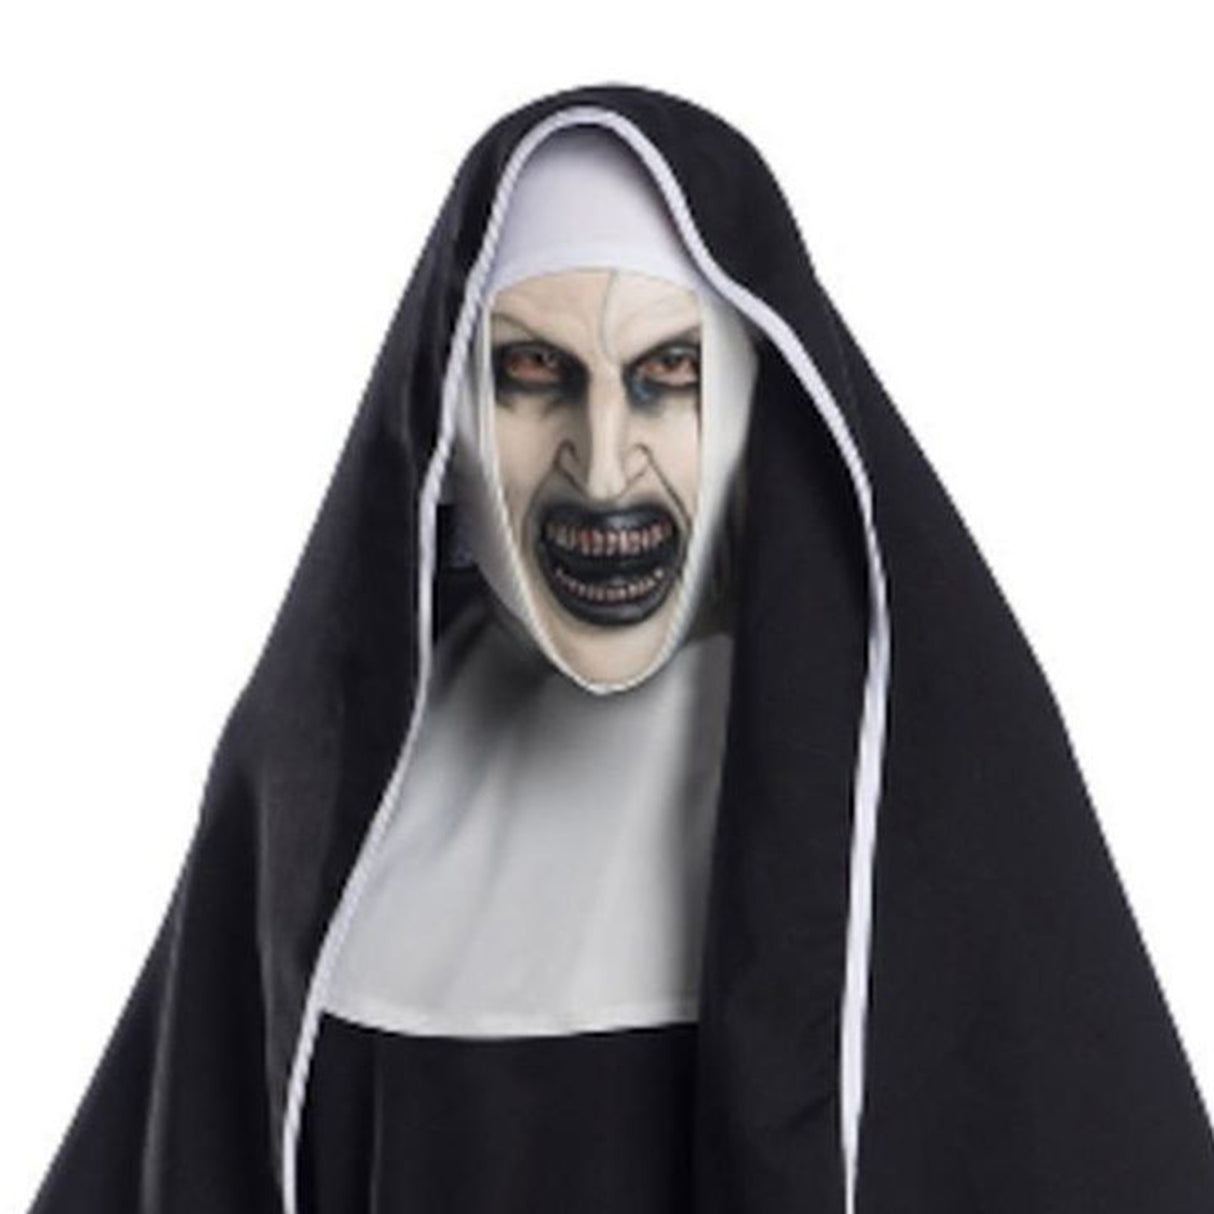 Rubies The Nun Deluxe Costume, Black (One Size)